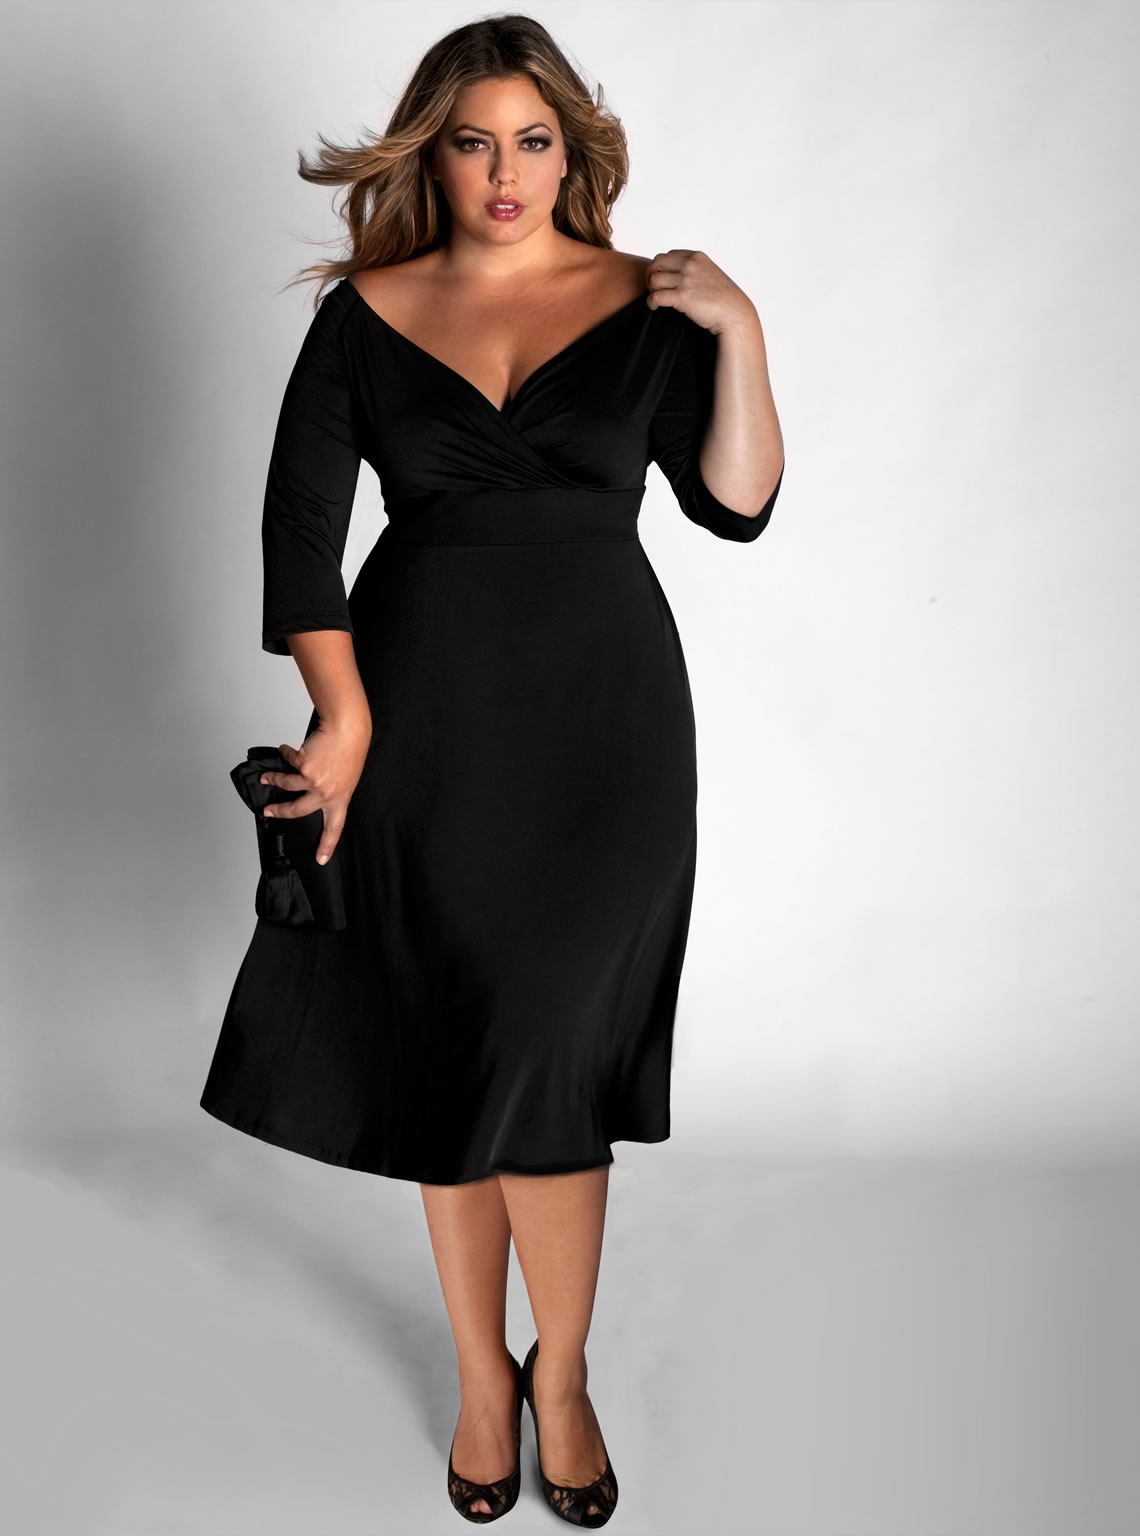 33-plus-size-dresses-for-2015-the-wow-style